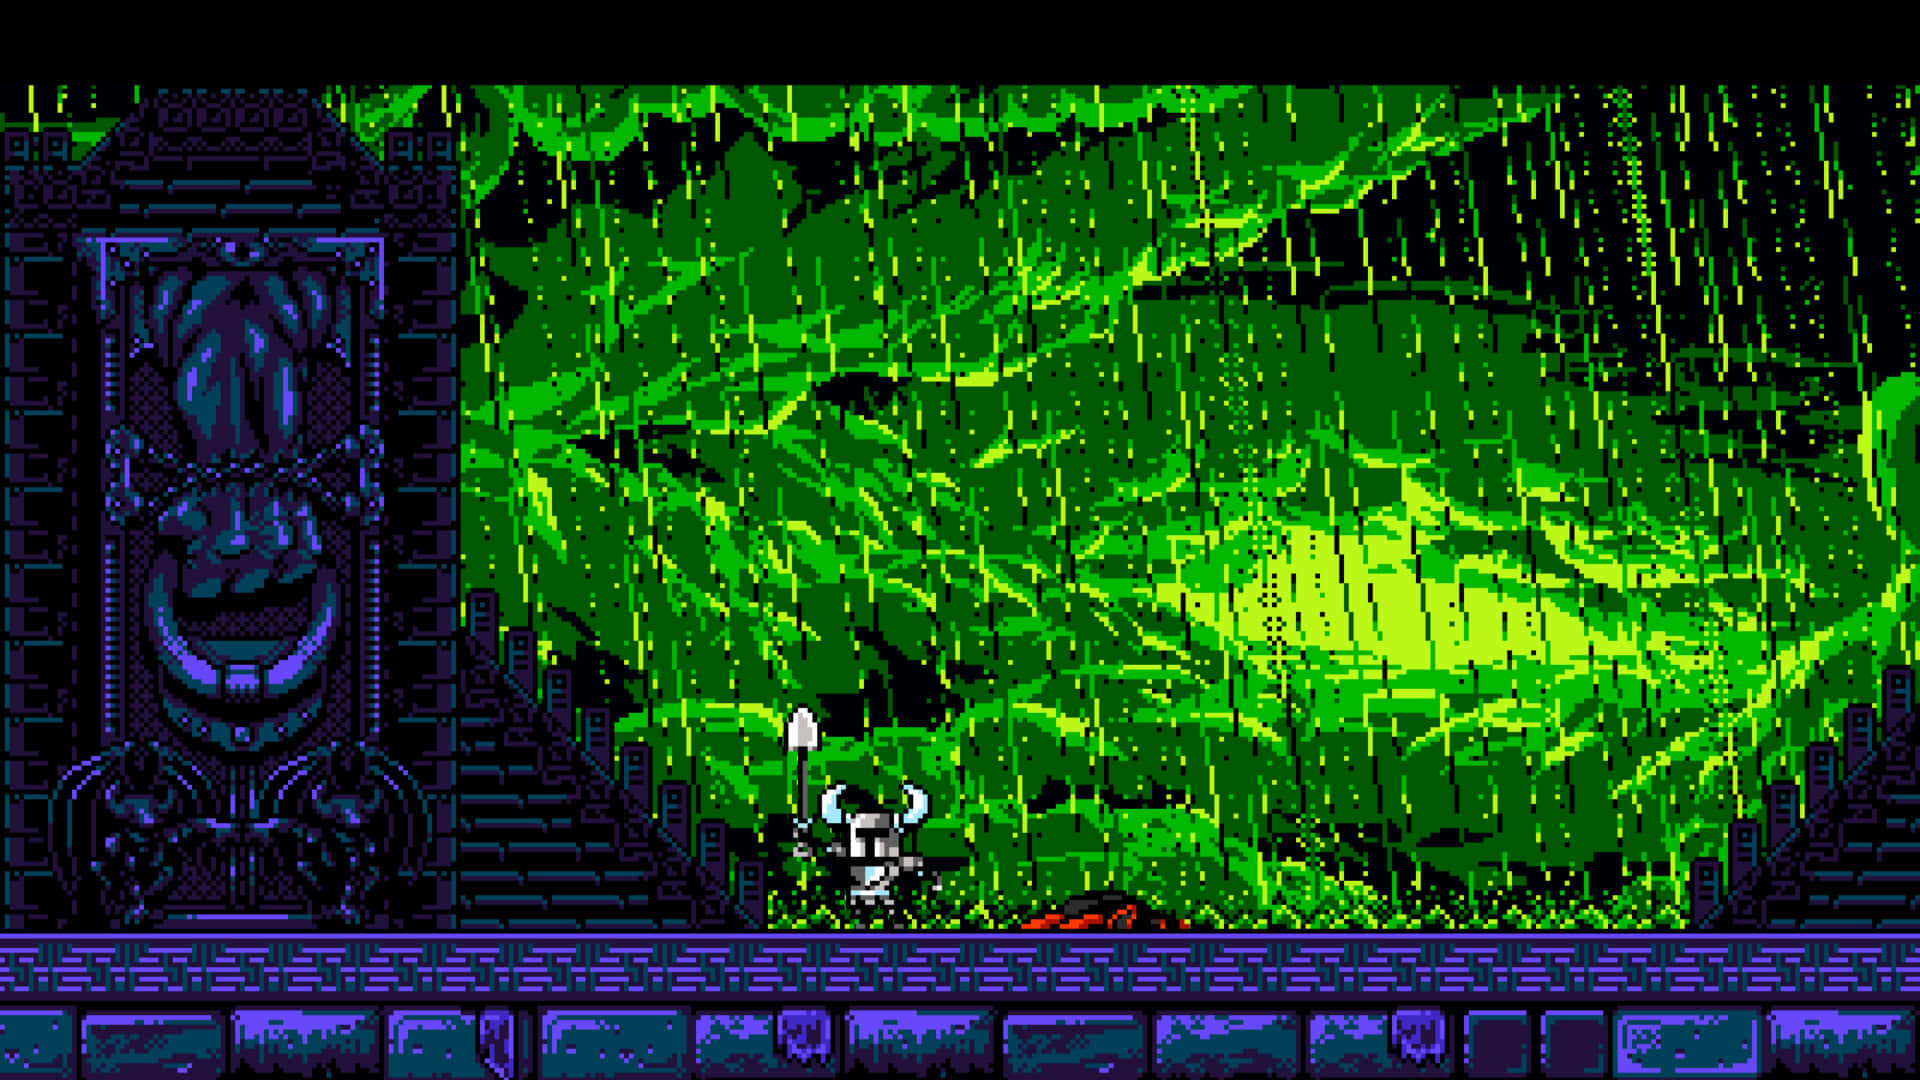 A Screenshot Of A Video Game With A Green Screen